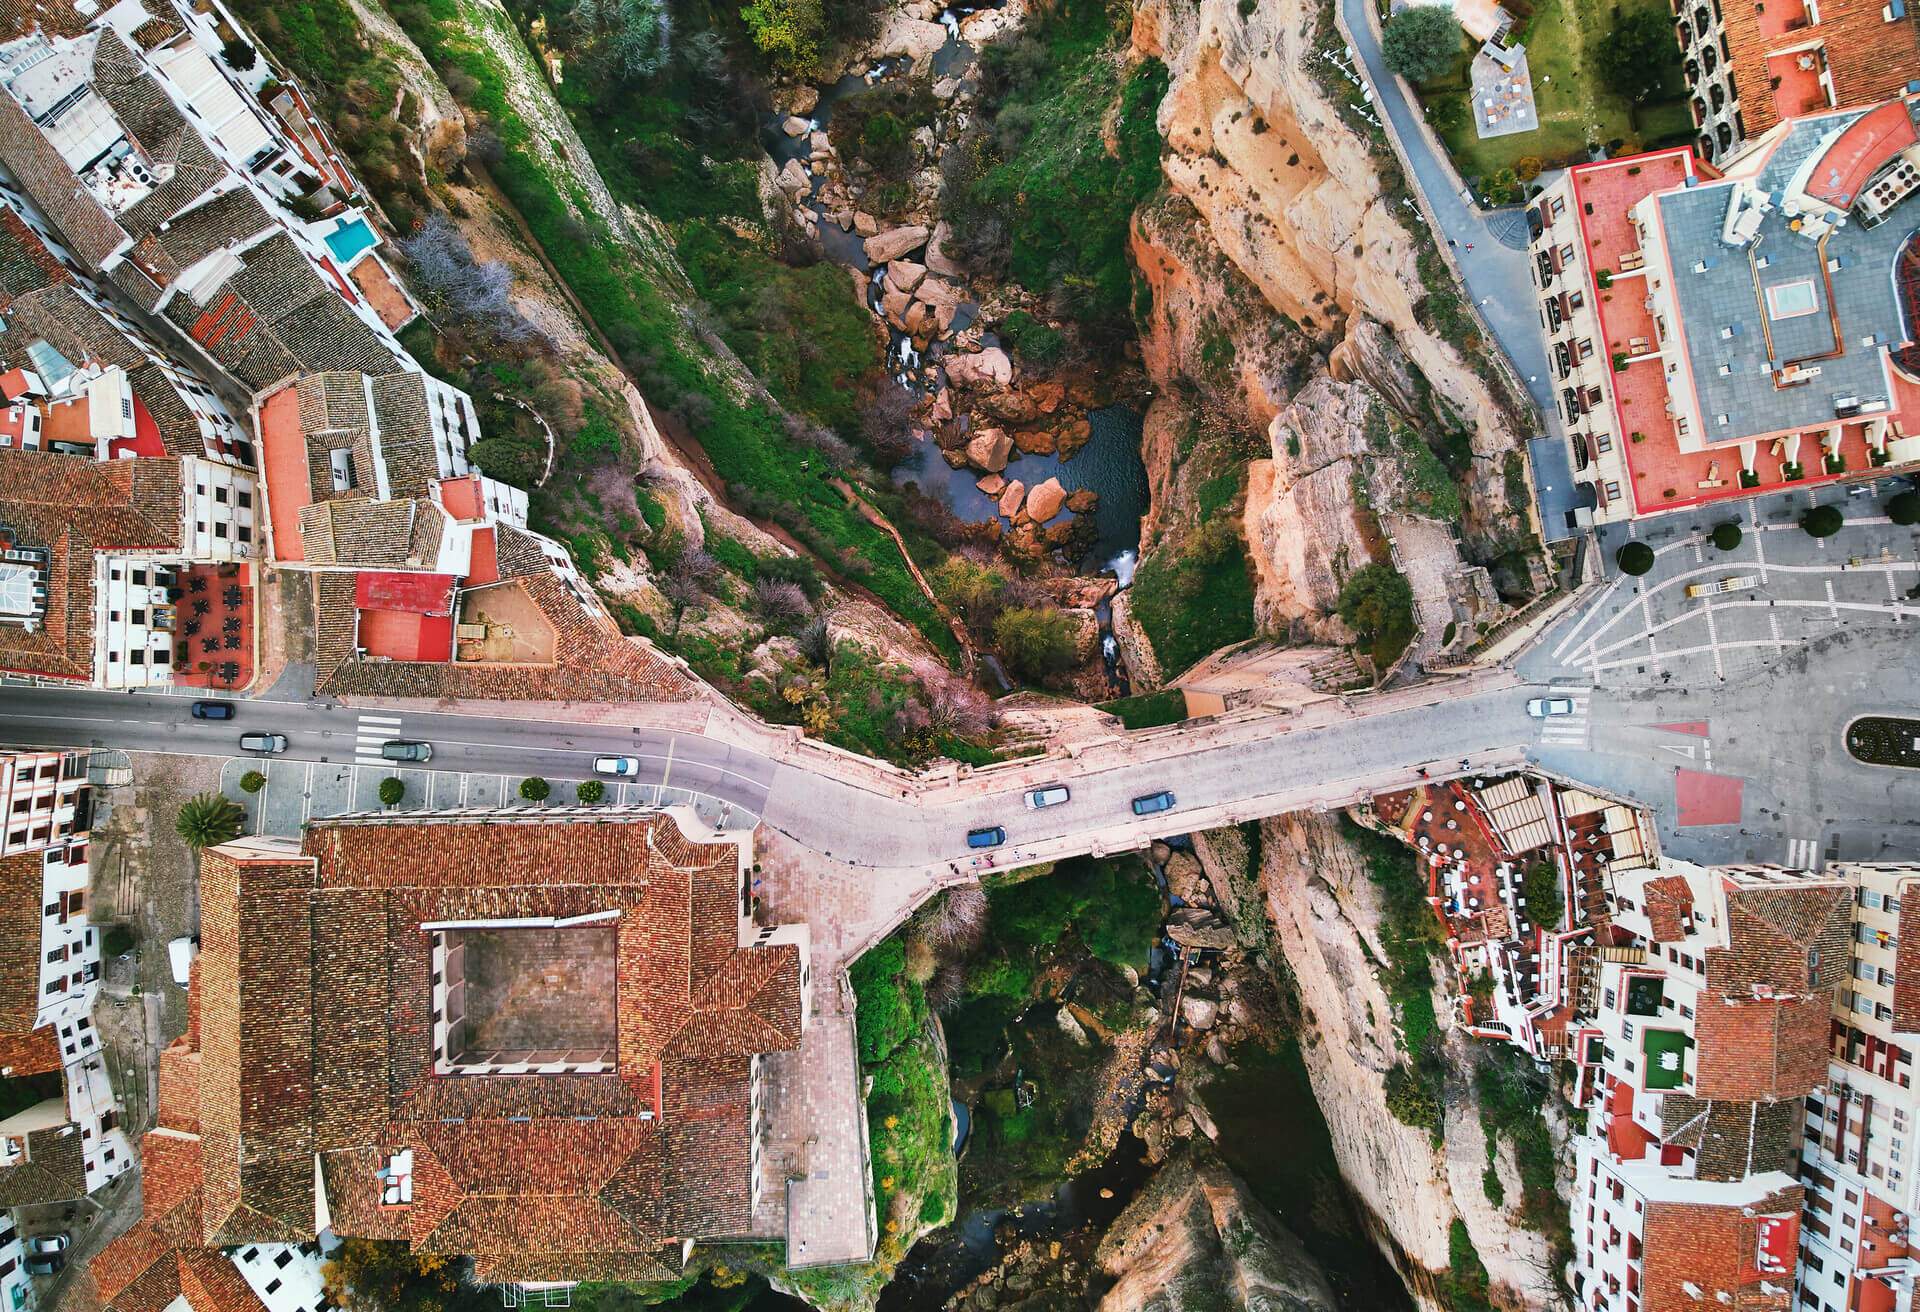 dest_spain_ronda-theme_roadtrip_car_aerial_gettyimages-1282664055_universal_within-usage-period_82968